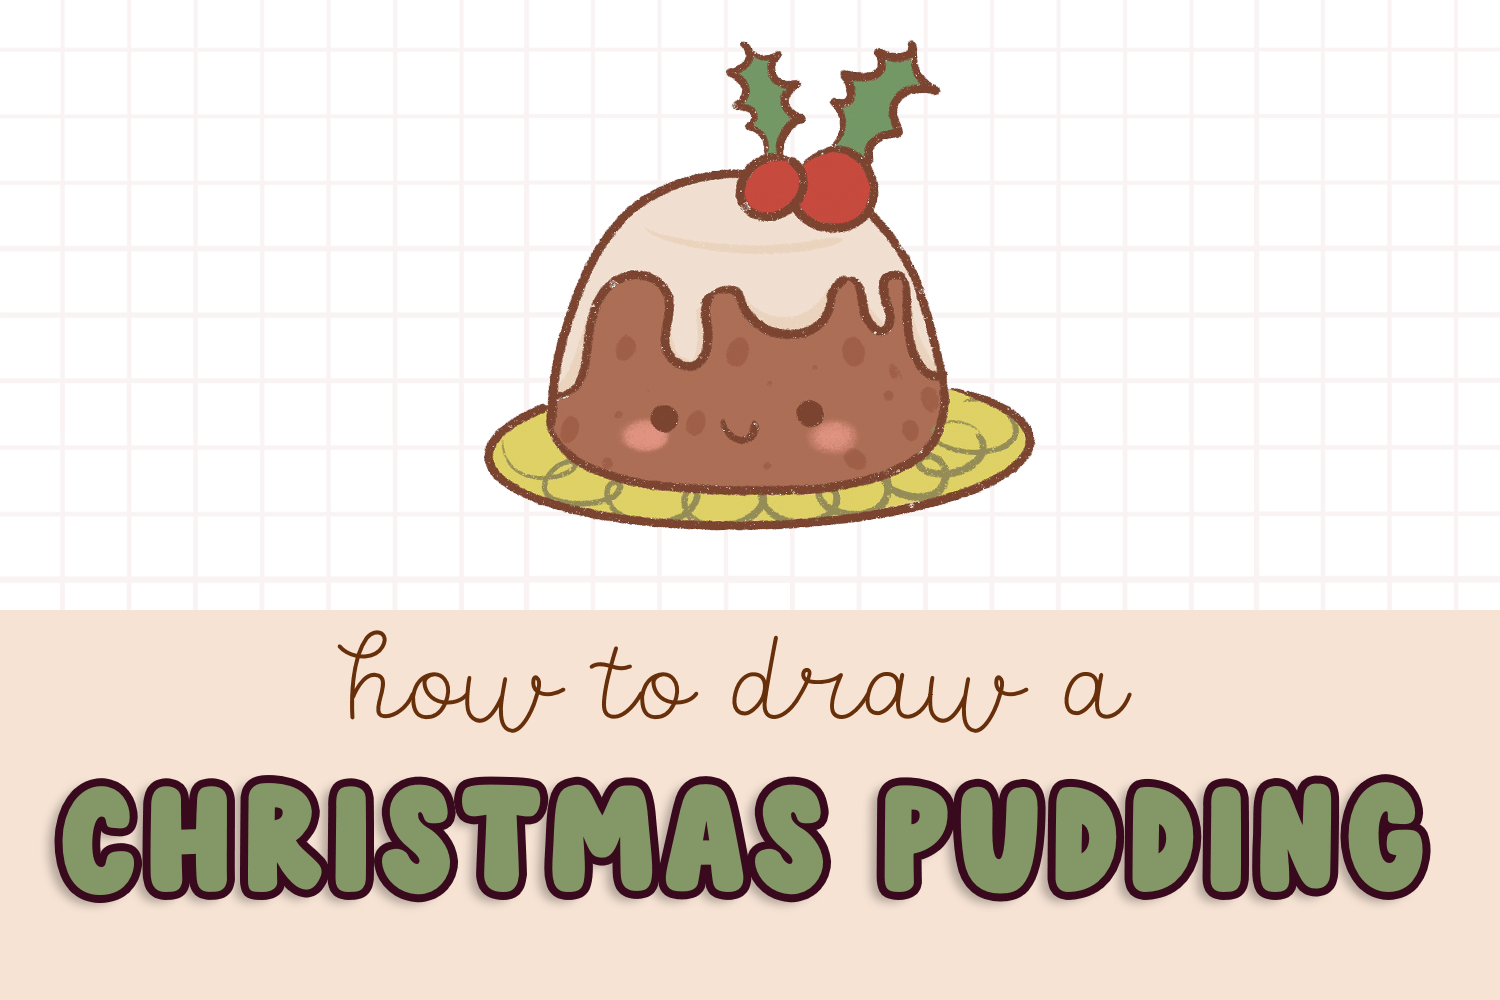 How to Draw a Christmas Pudding Easy for Kids and Beginners